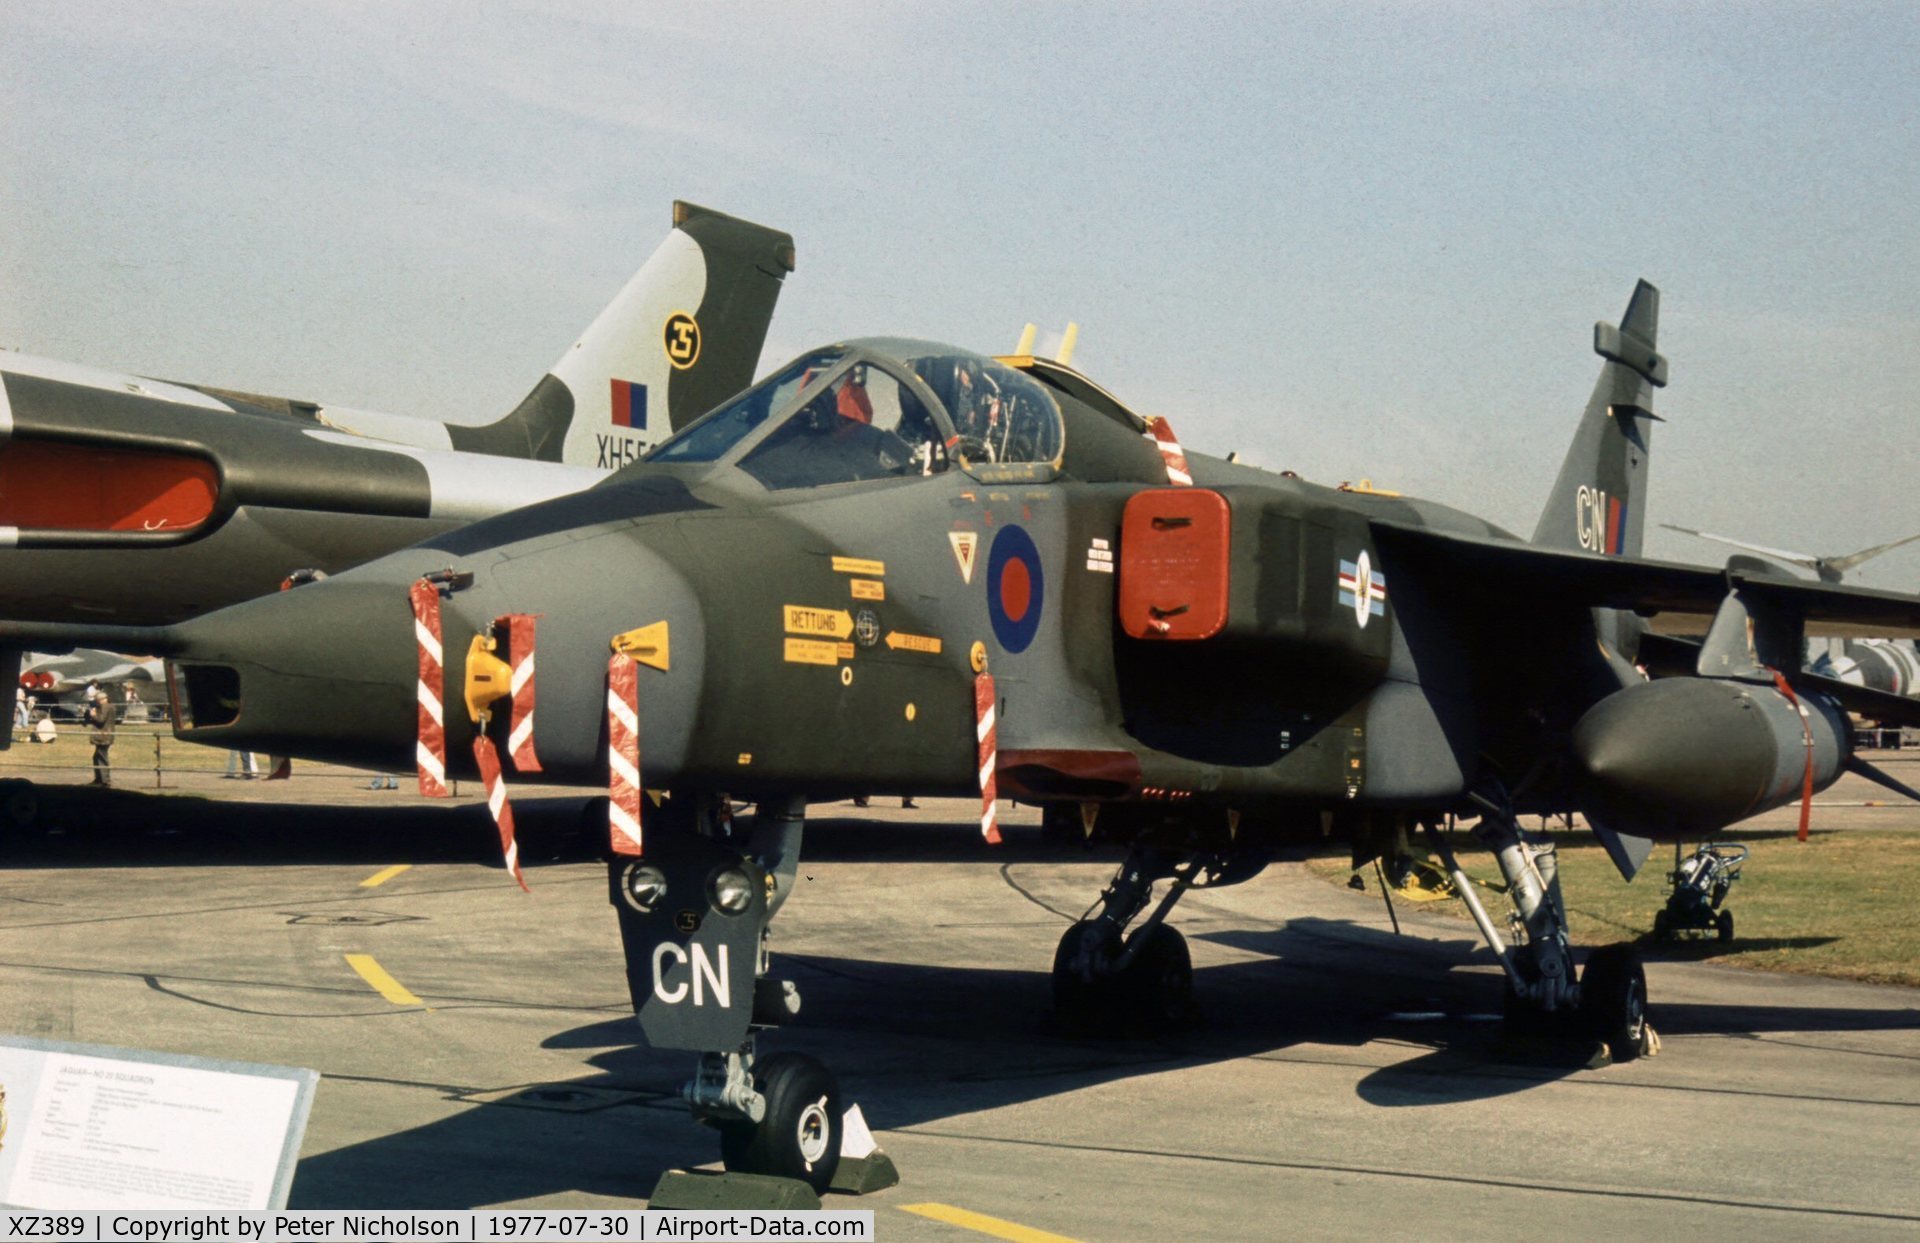 XZ389, 1977 Sepecat Jaguar GR.1 C/N S.154, Another view of the 20 Squadron Jaguar GR.1 on display at the 1977 Royal Review at RAF Finningley.